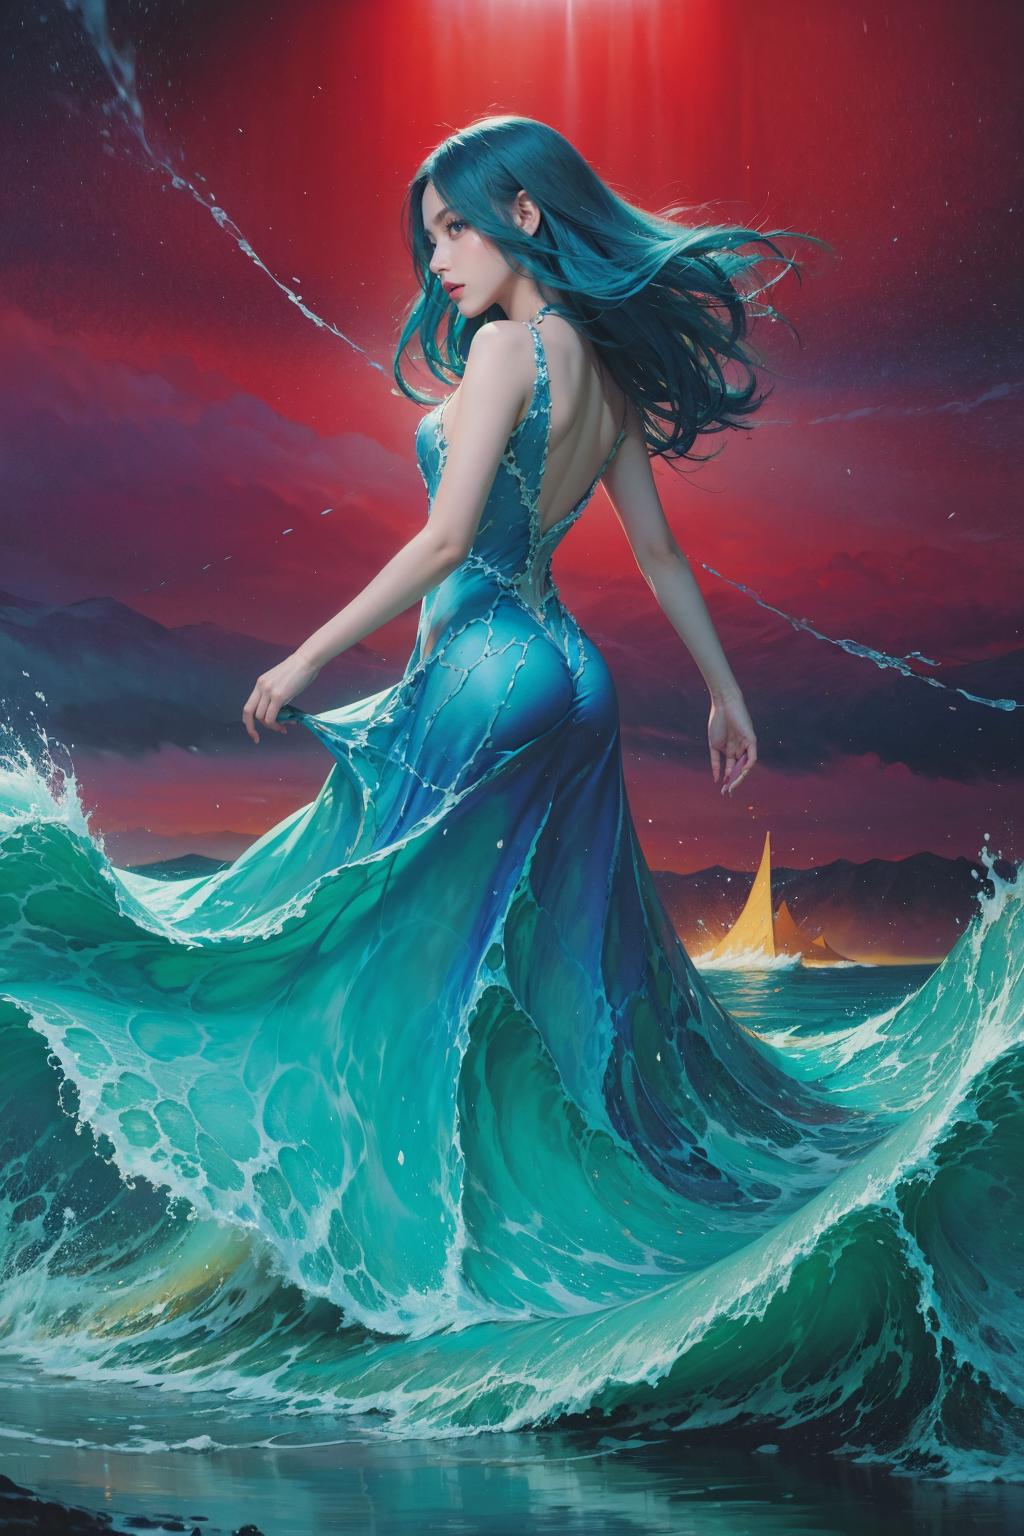 Artistic Painting of a Woman in a Blue Dress Standing in the Ocean